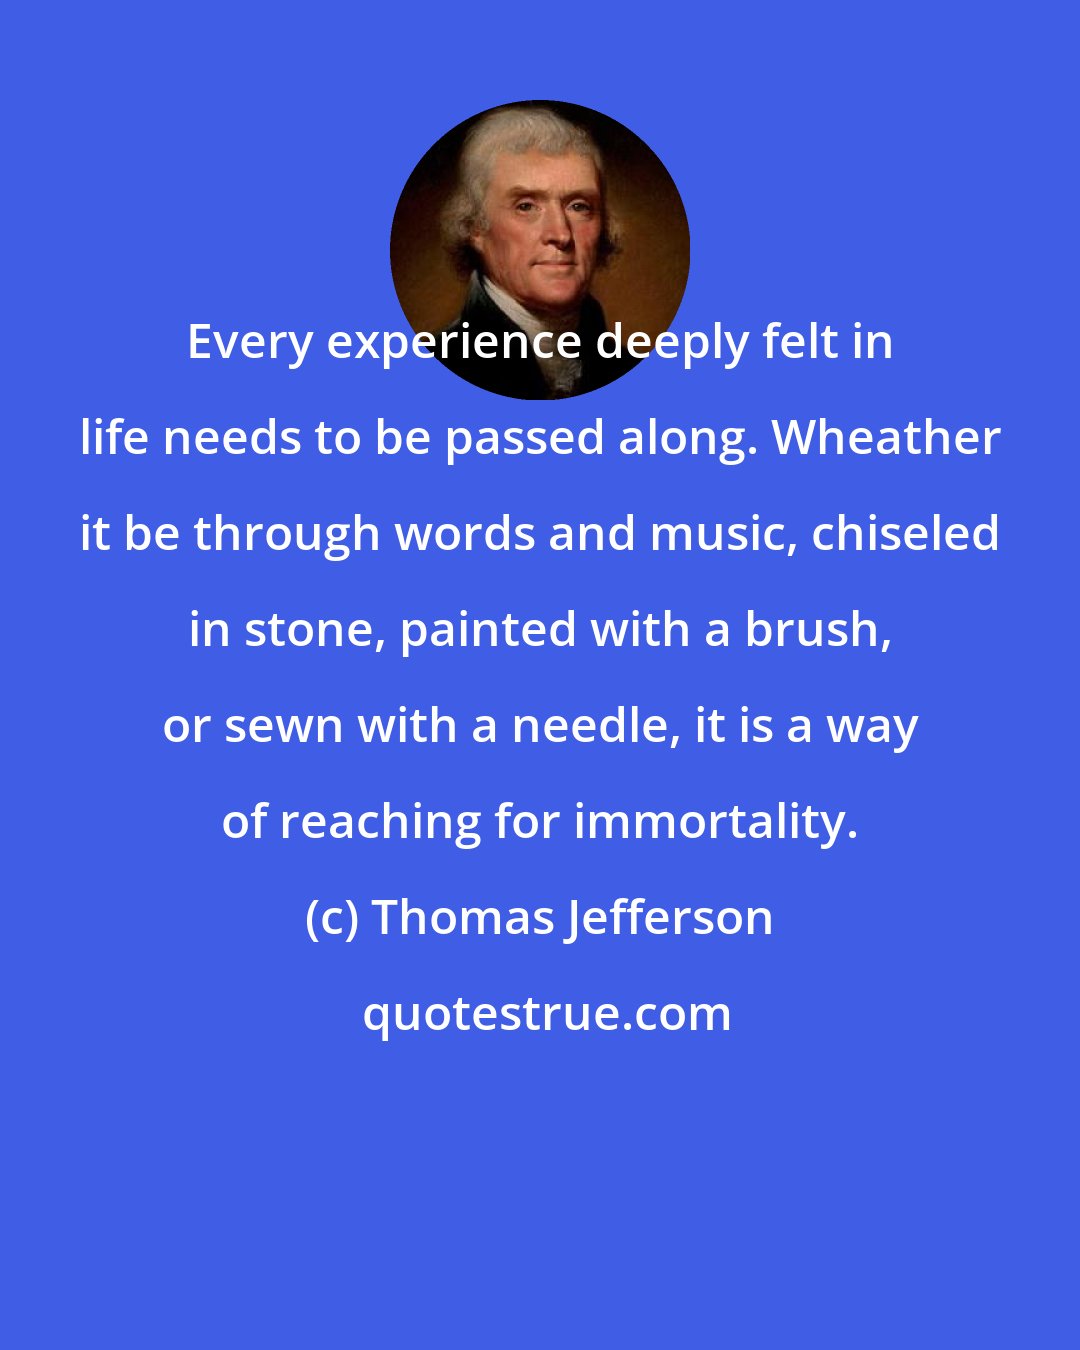 Thomas Jefferson: Every experience deeply felt in life needs to be passed along. Wheather it be through words and music, chiseled in stone, painted with a brush, or sewn with a needle, it is a way of reaching for immortality.